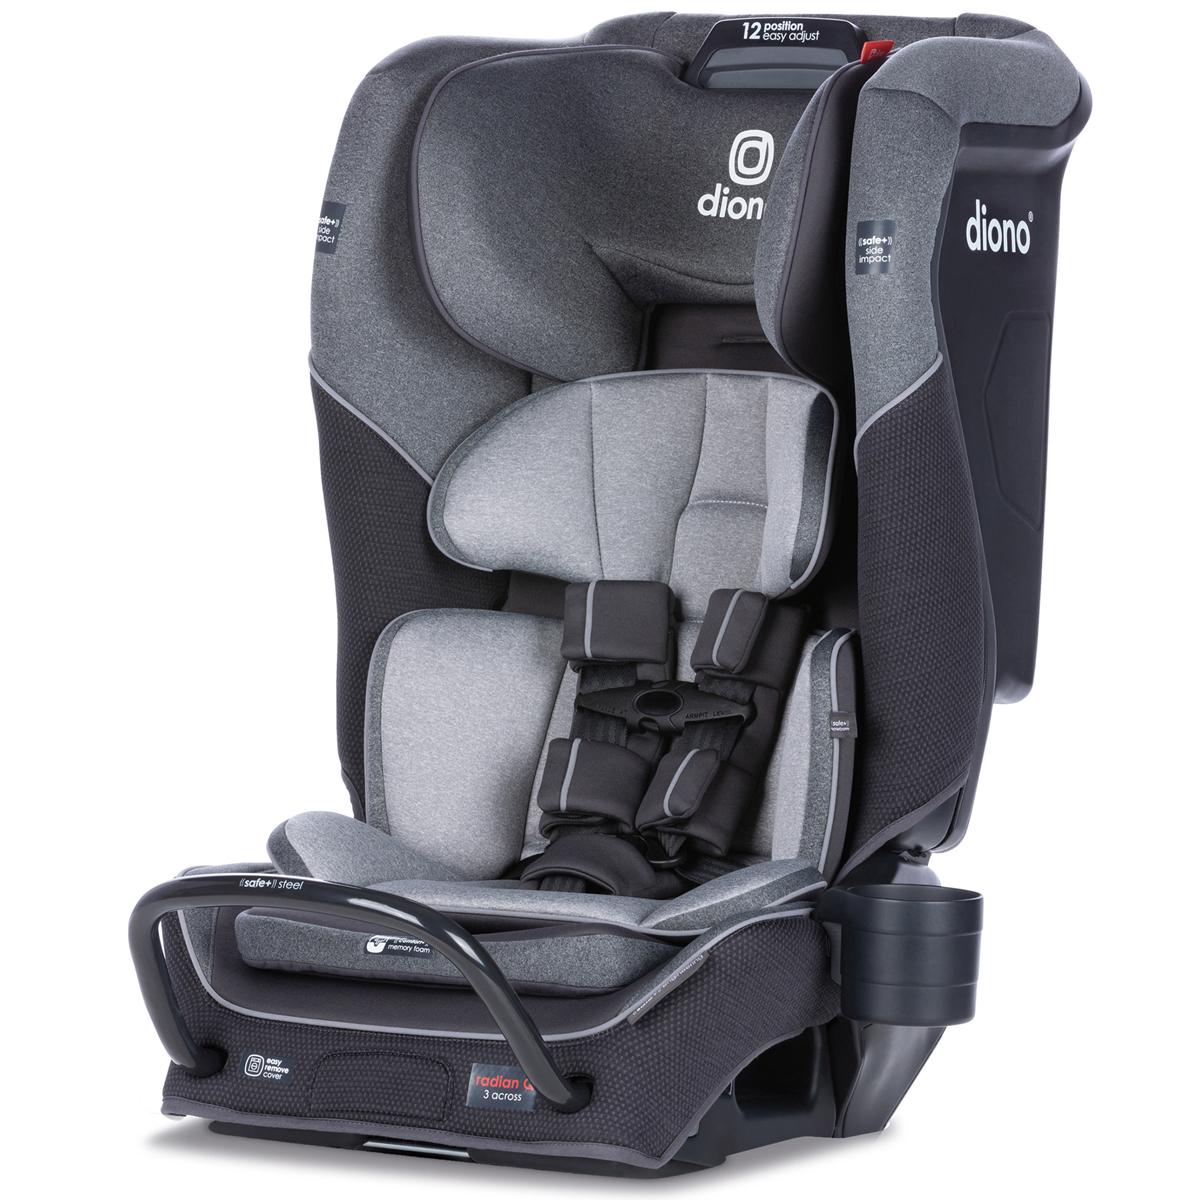 Diono Radian 3QX All-in-One Convertible Seat for $209.99 Shipped